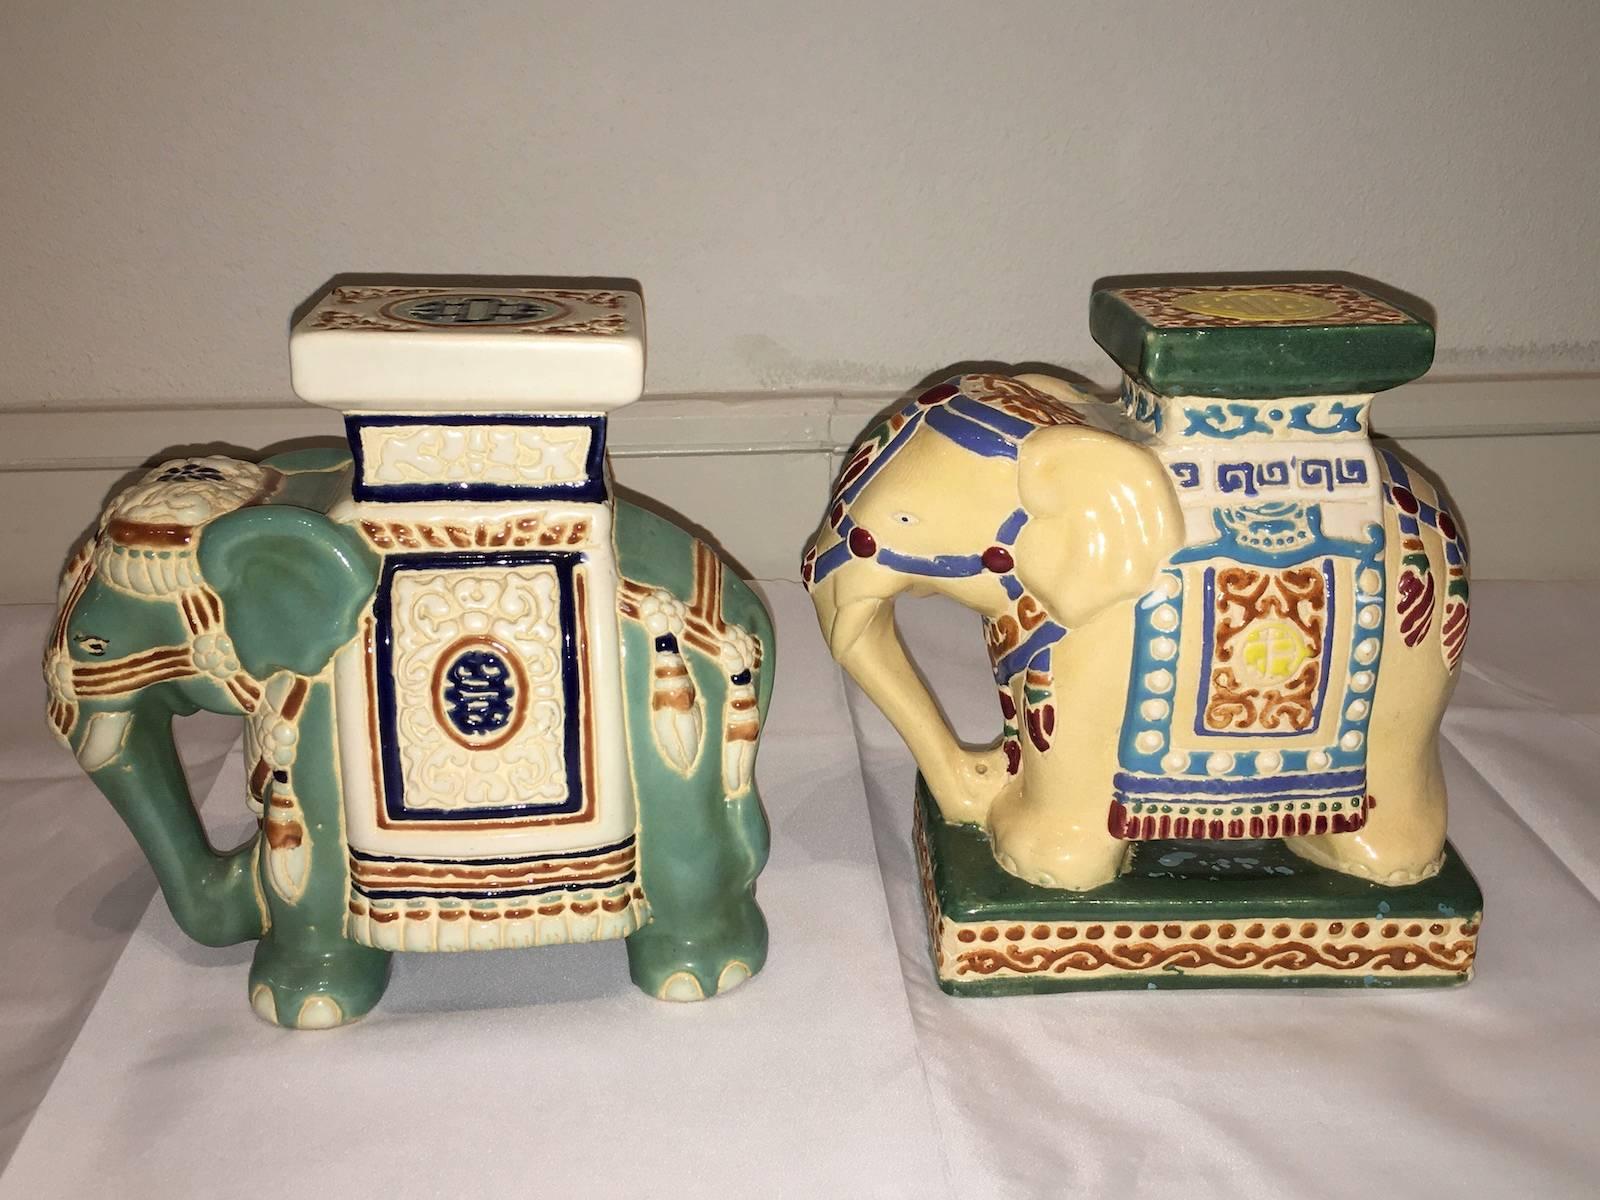 Lot of two mid-20th century glazed ceramic elephant bookends, plant stands, flower pot stand. Handmade of ceramic. Nice addition to your home, patio or garden. They vary a little in size, measurements given are for the tallest.